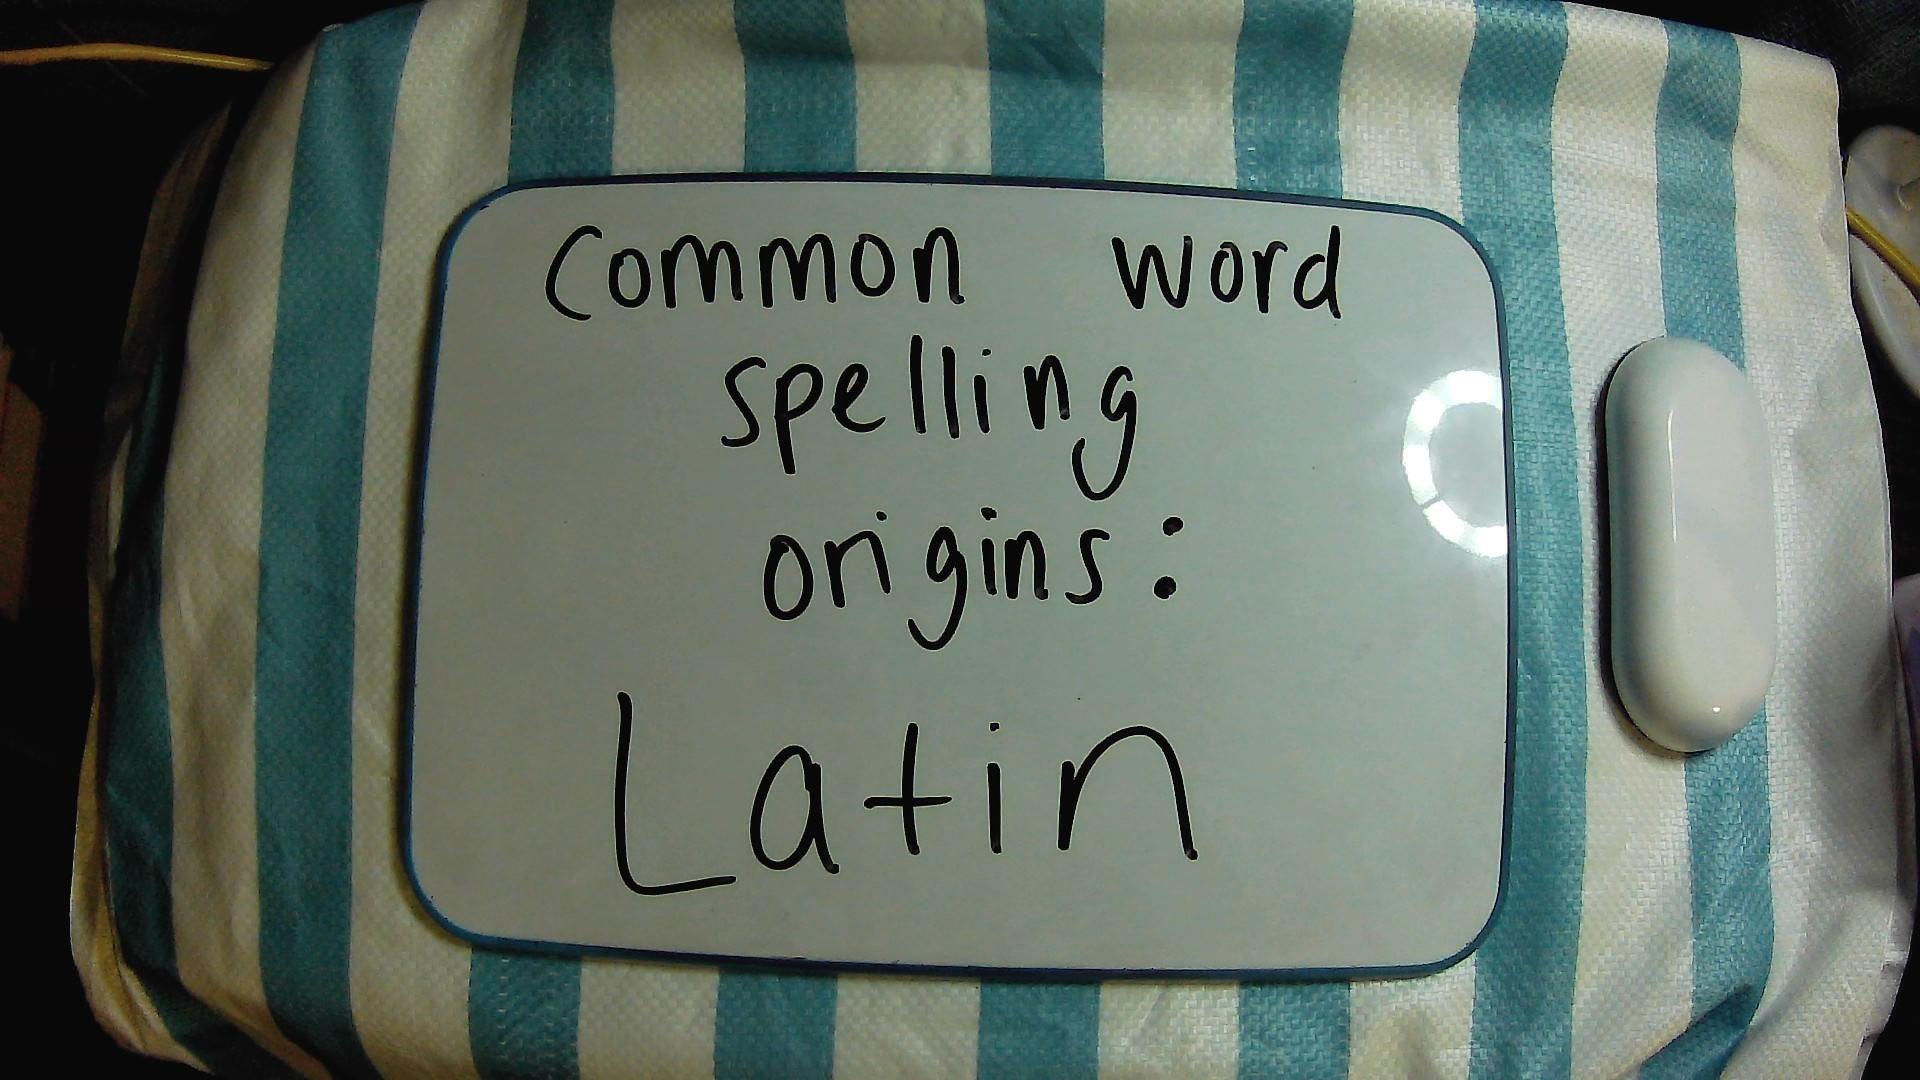 Word Spellings with a Latin Origin